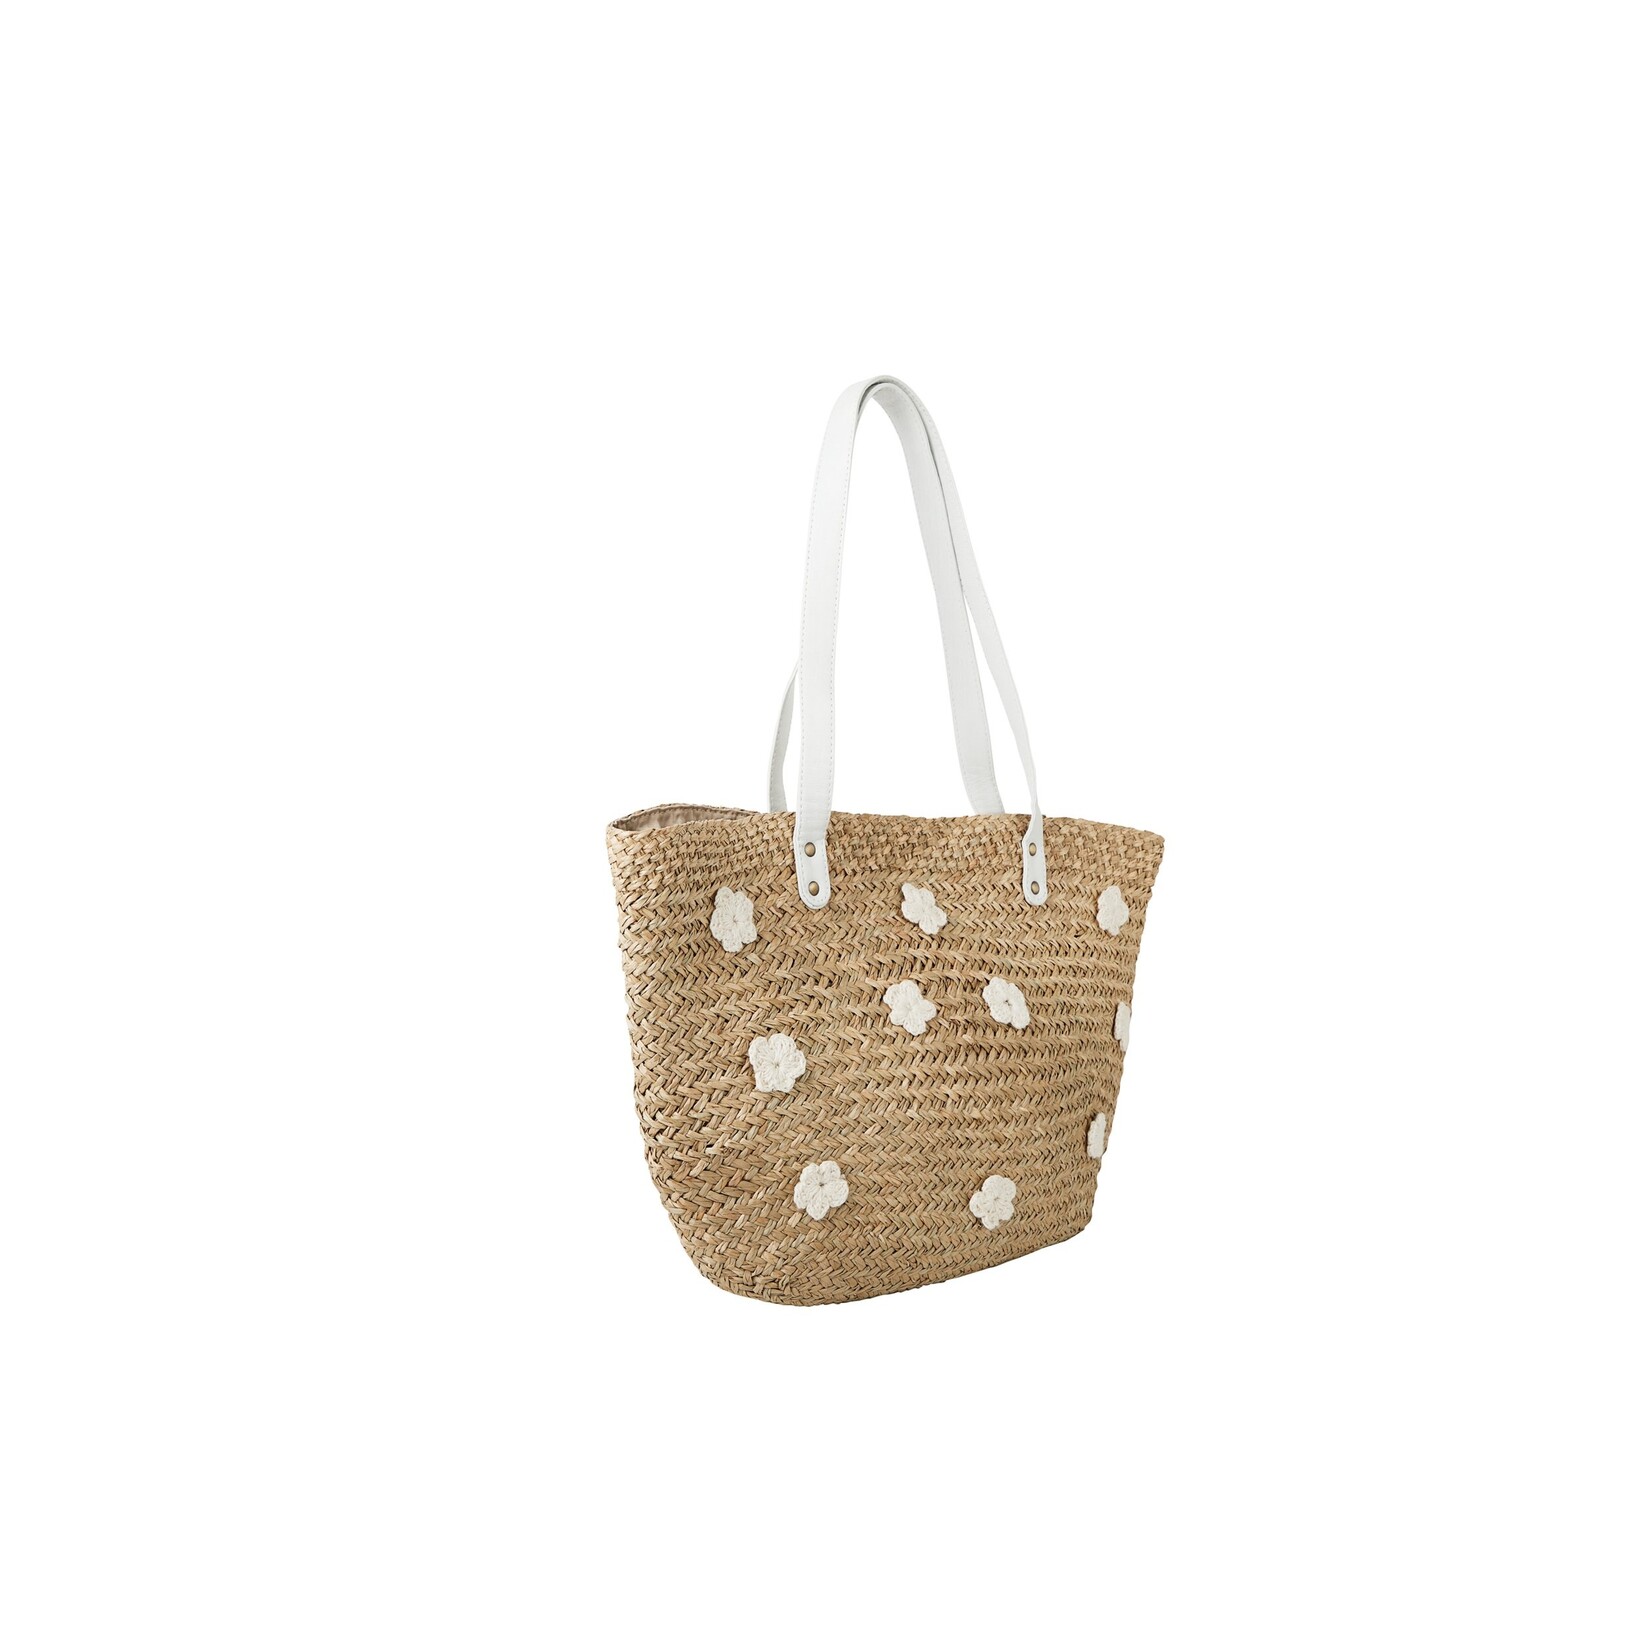 Sarah Stewart The Daisy Tote in White